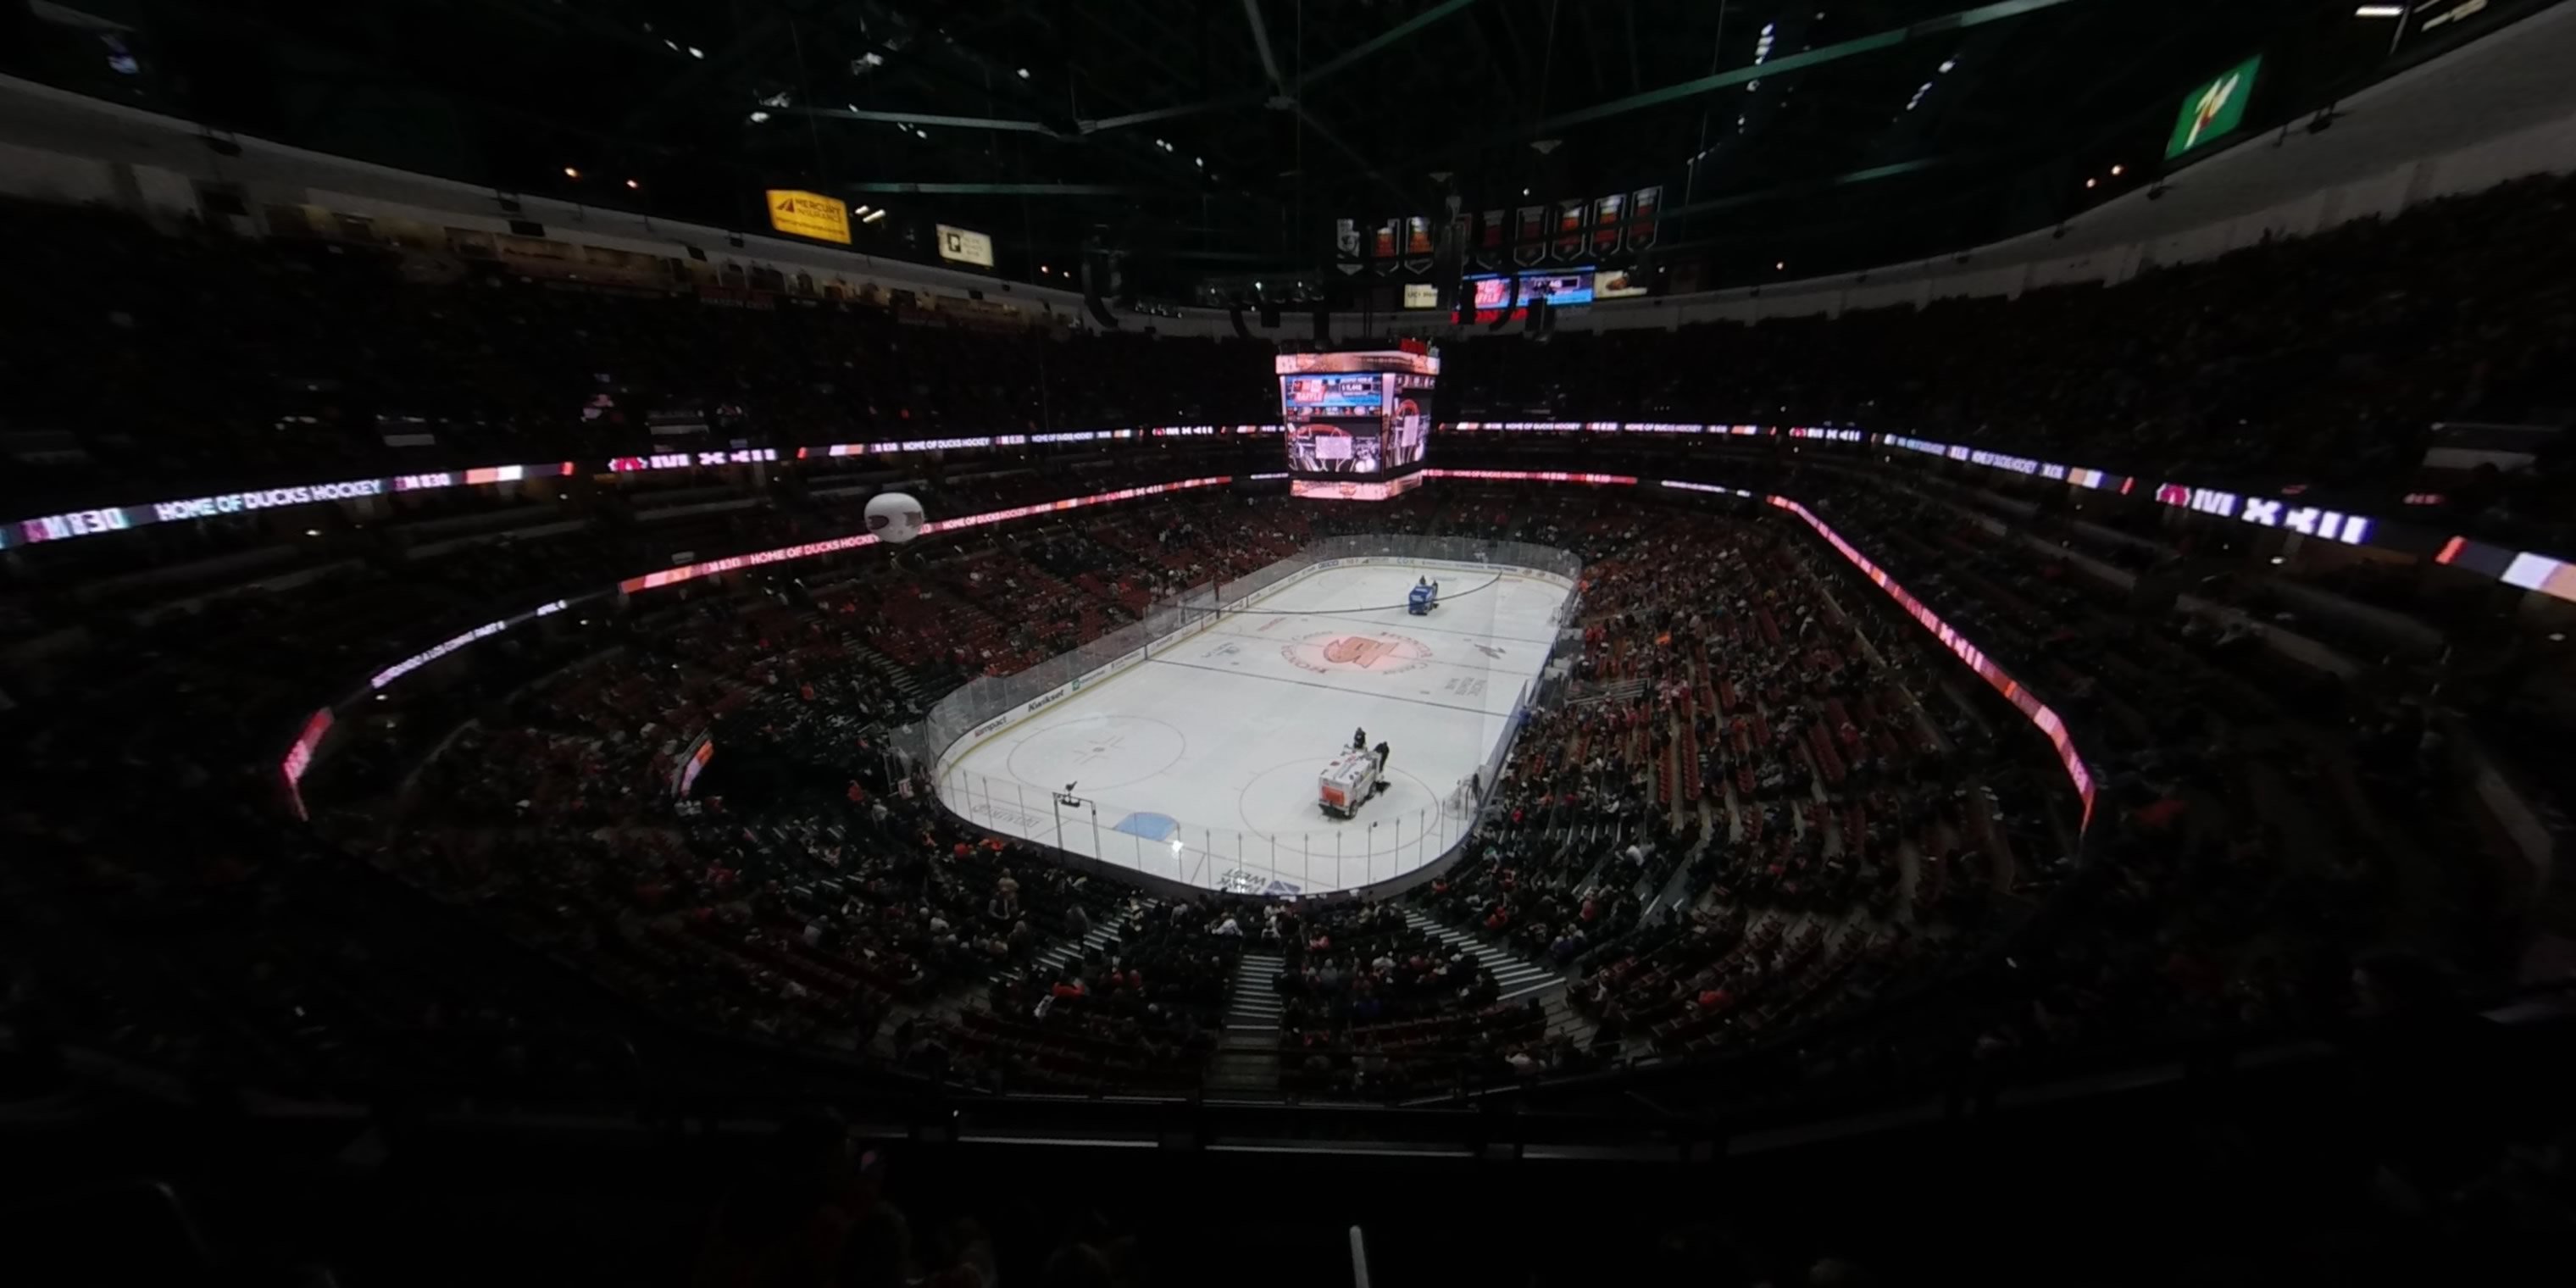 section 419 panoramic seat view  for hockey - honda center